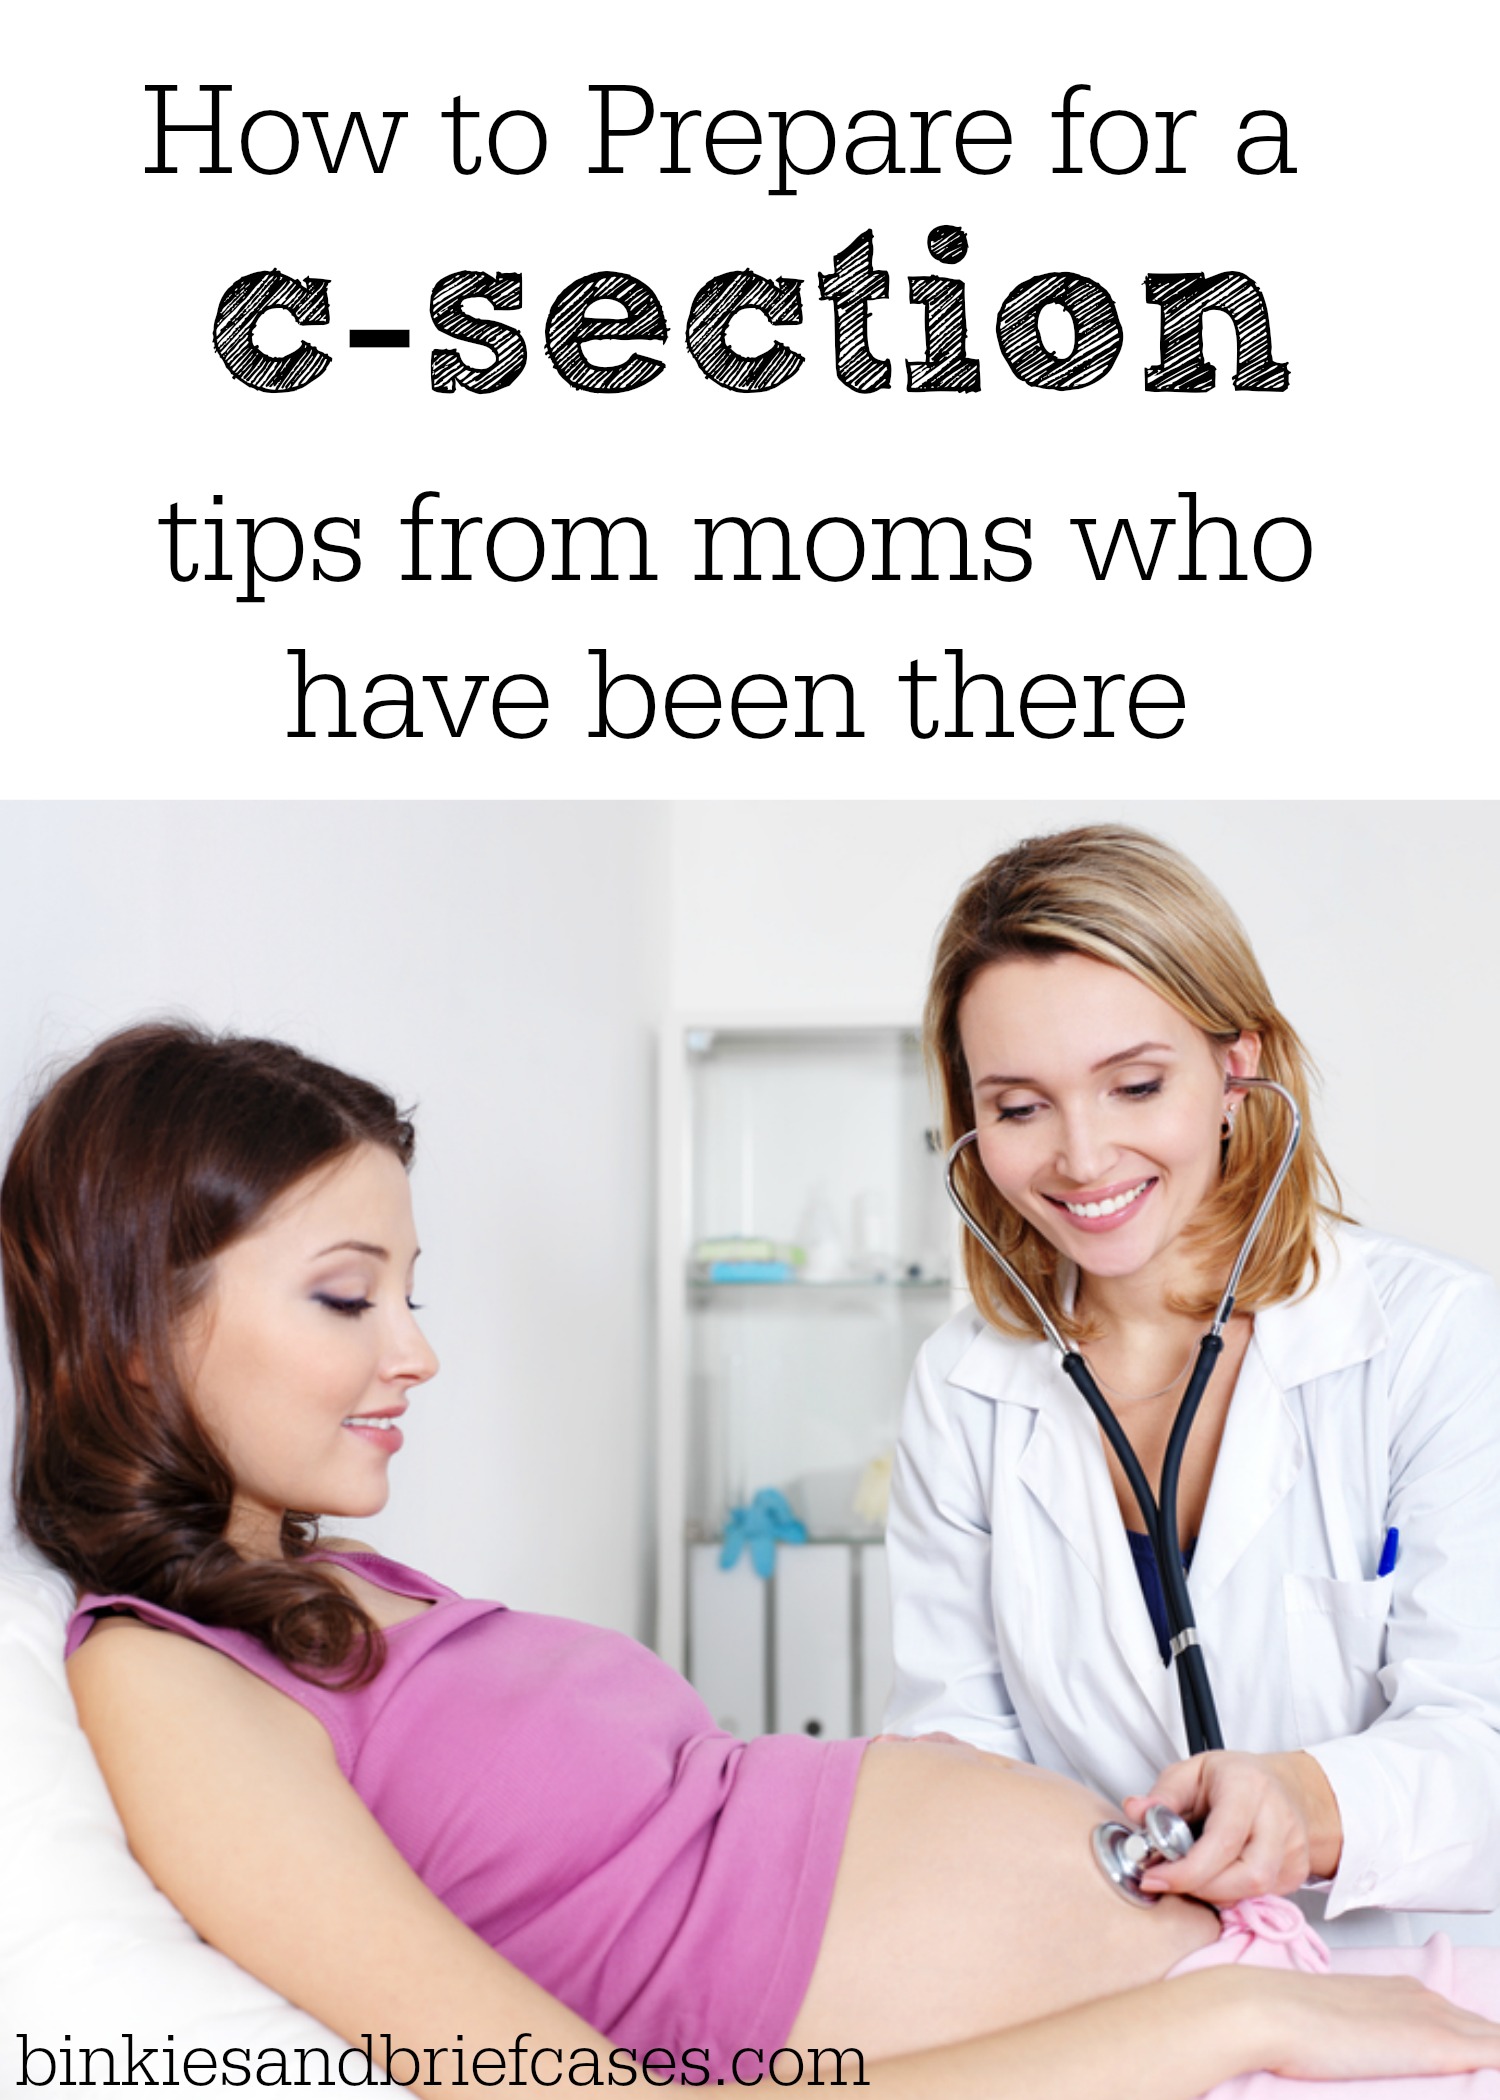 Ladies who have gone through c-sections share tips and tricks that helped them during their hospital stay and what what they wish they had known. The comments on this one are helpful too!